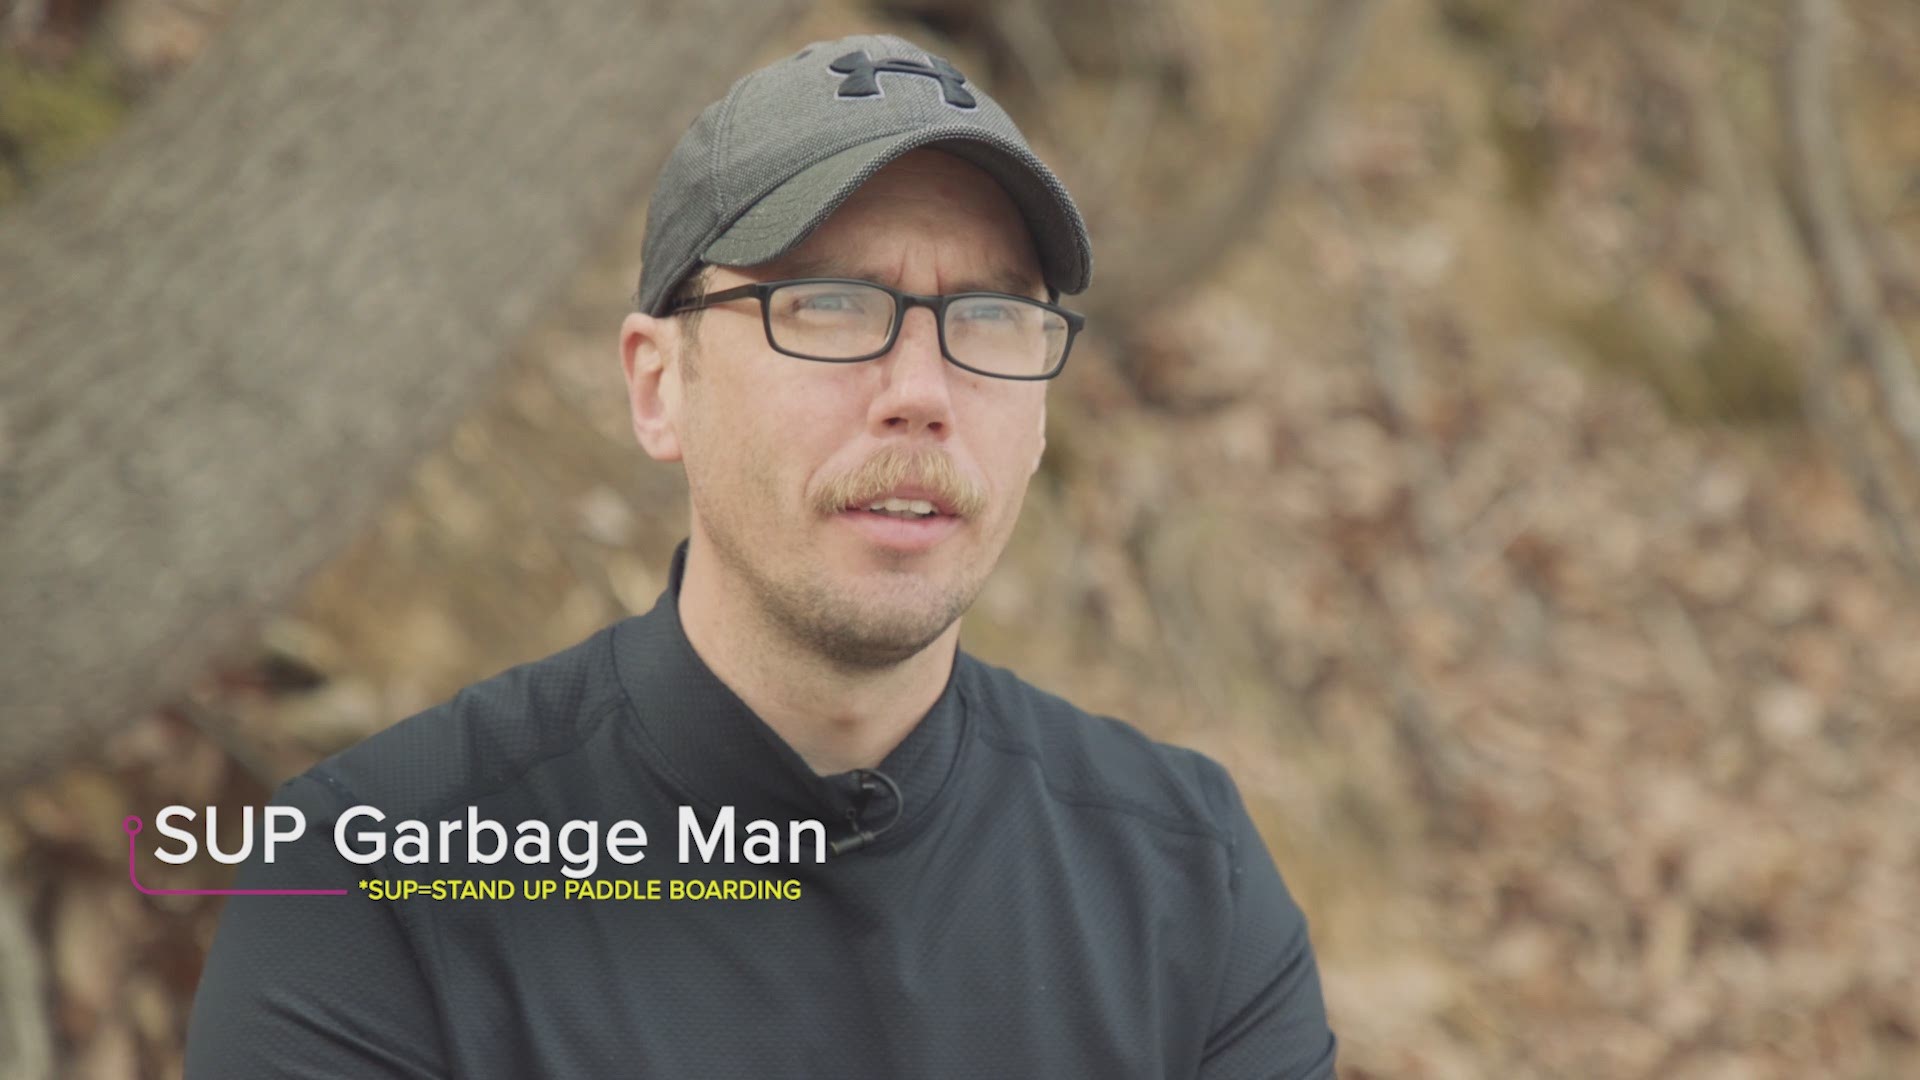 Since he started in May 2019, Joe Wright, or SUP Garbage Man, has collected 1360 cubic feet of trash from the Potomac River.